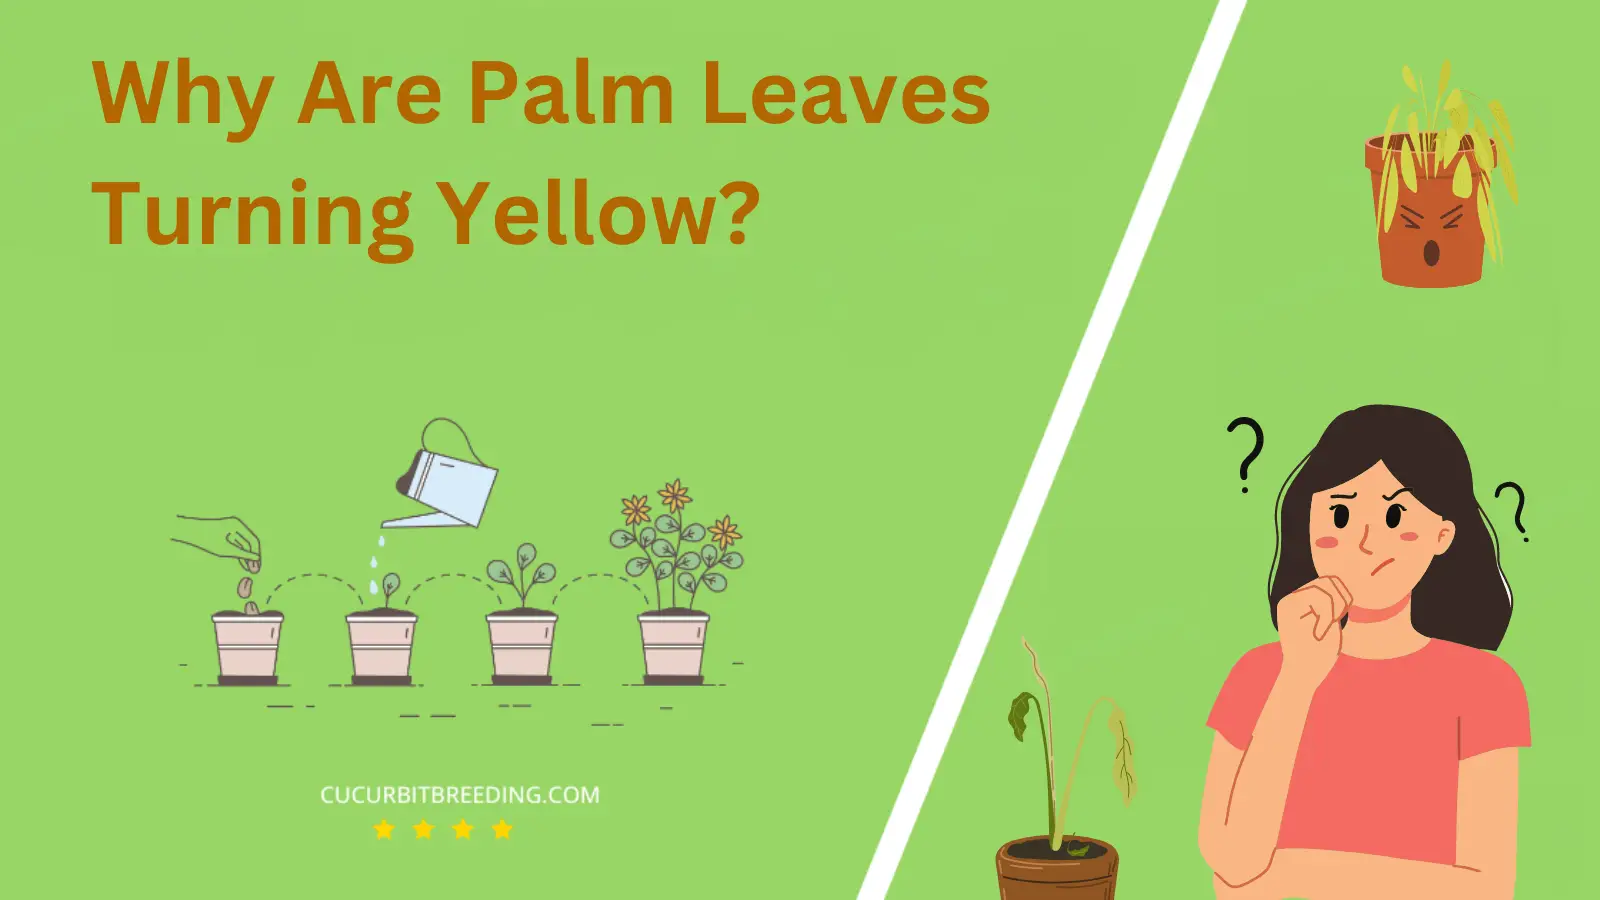 Why Are Palm Leaves Turning Yellow